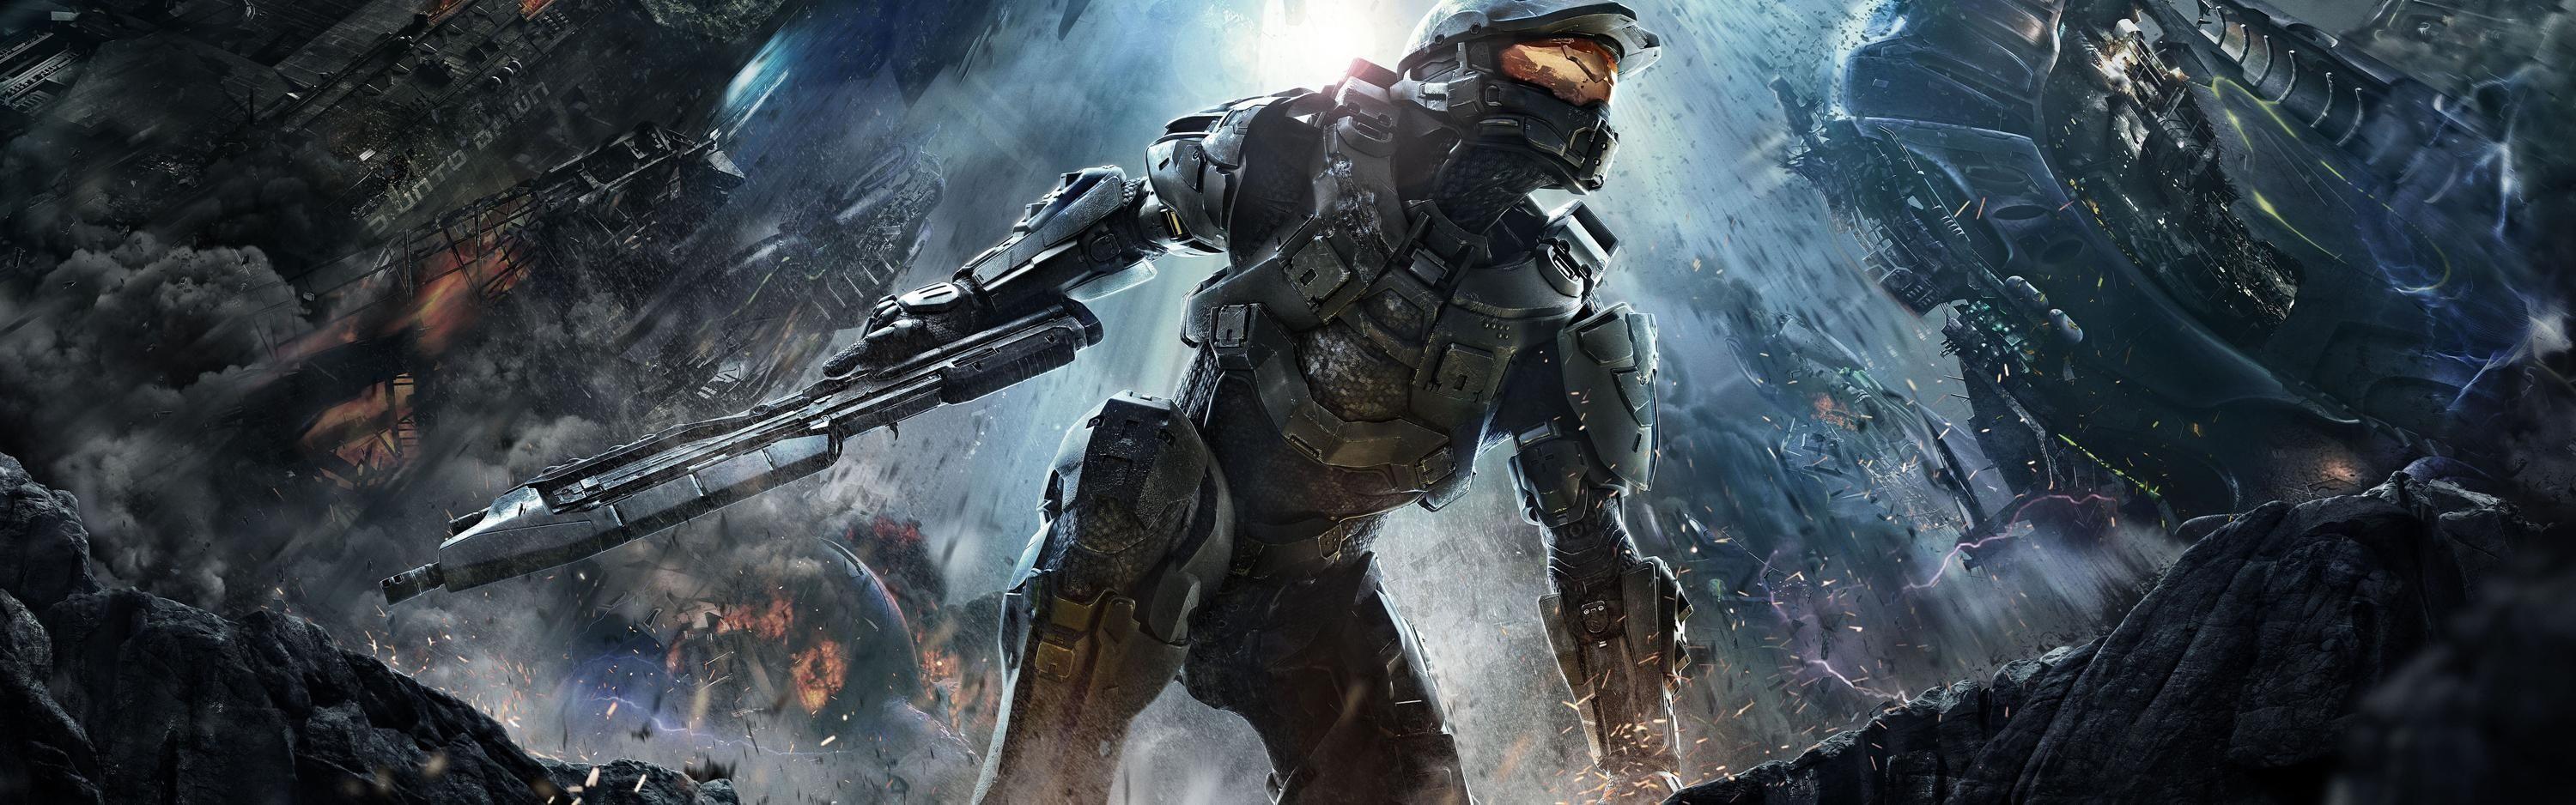 Halo Dual Screen Wallpapers Top Free Halo Dual Screen Backgrounds